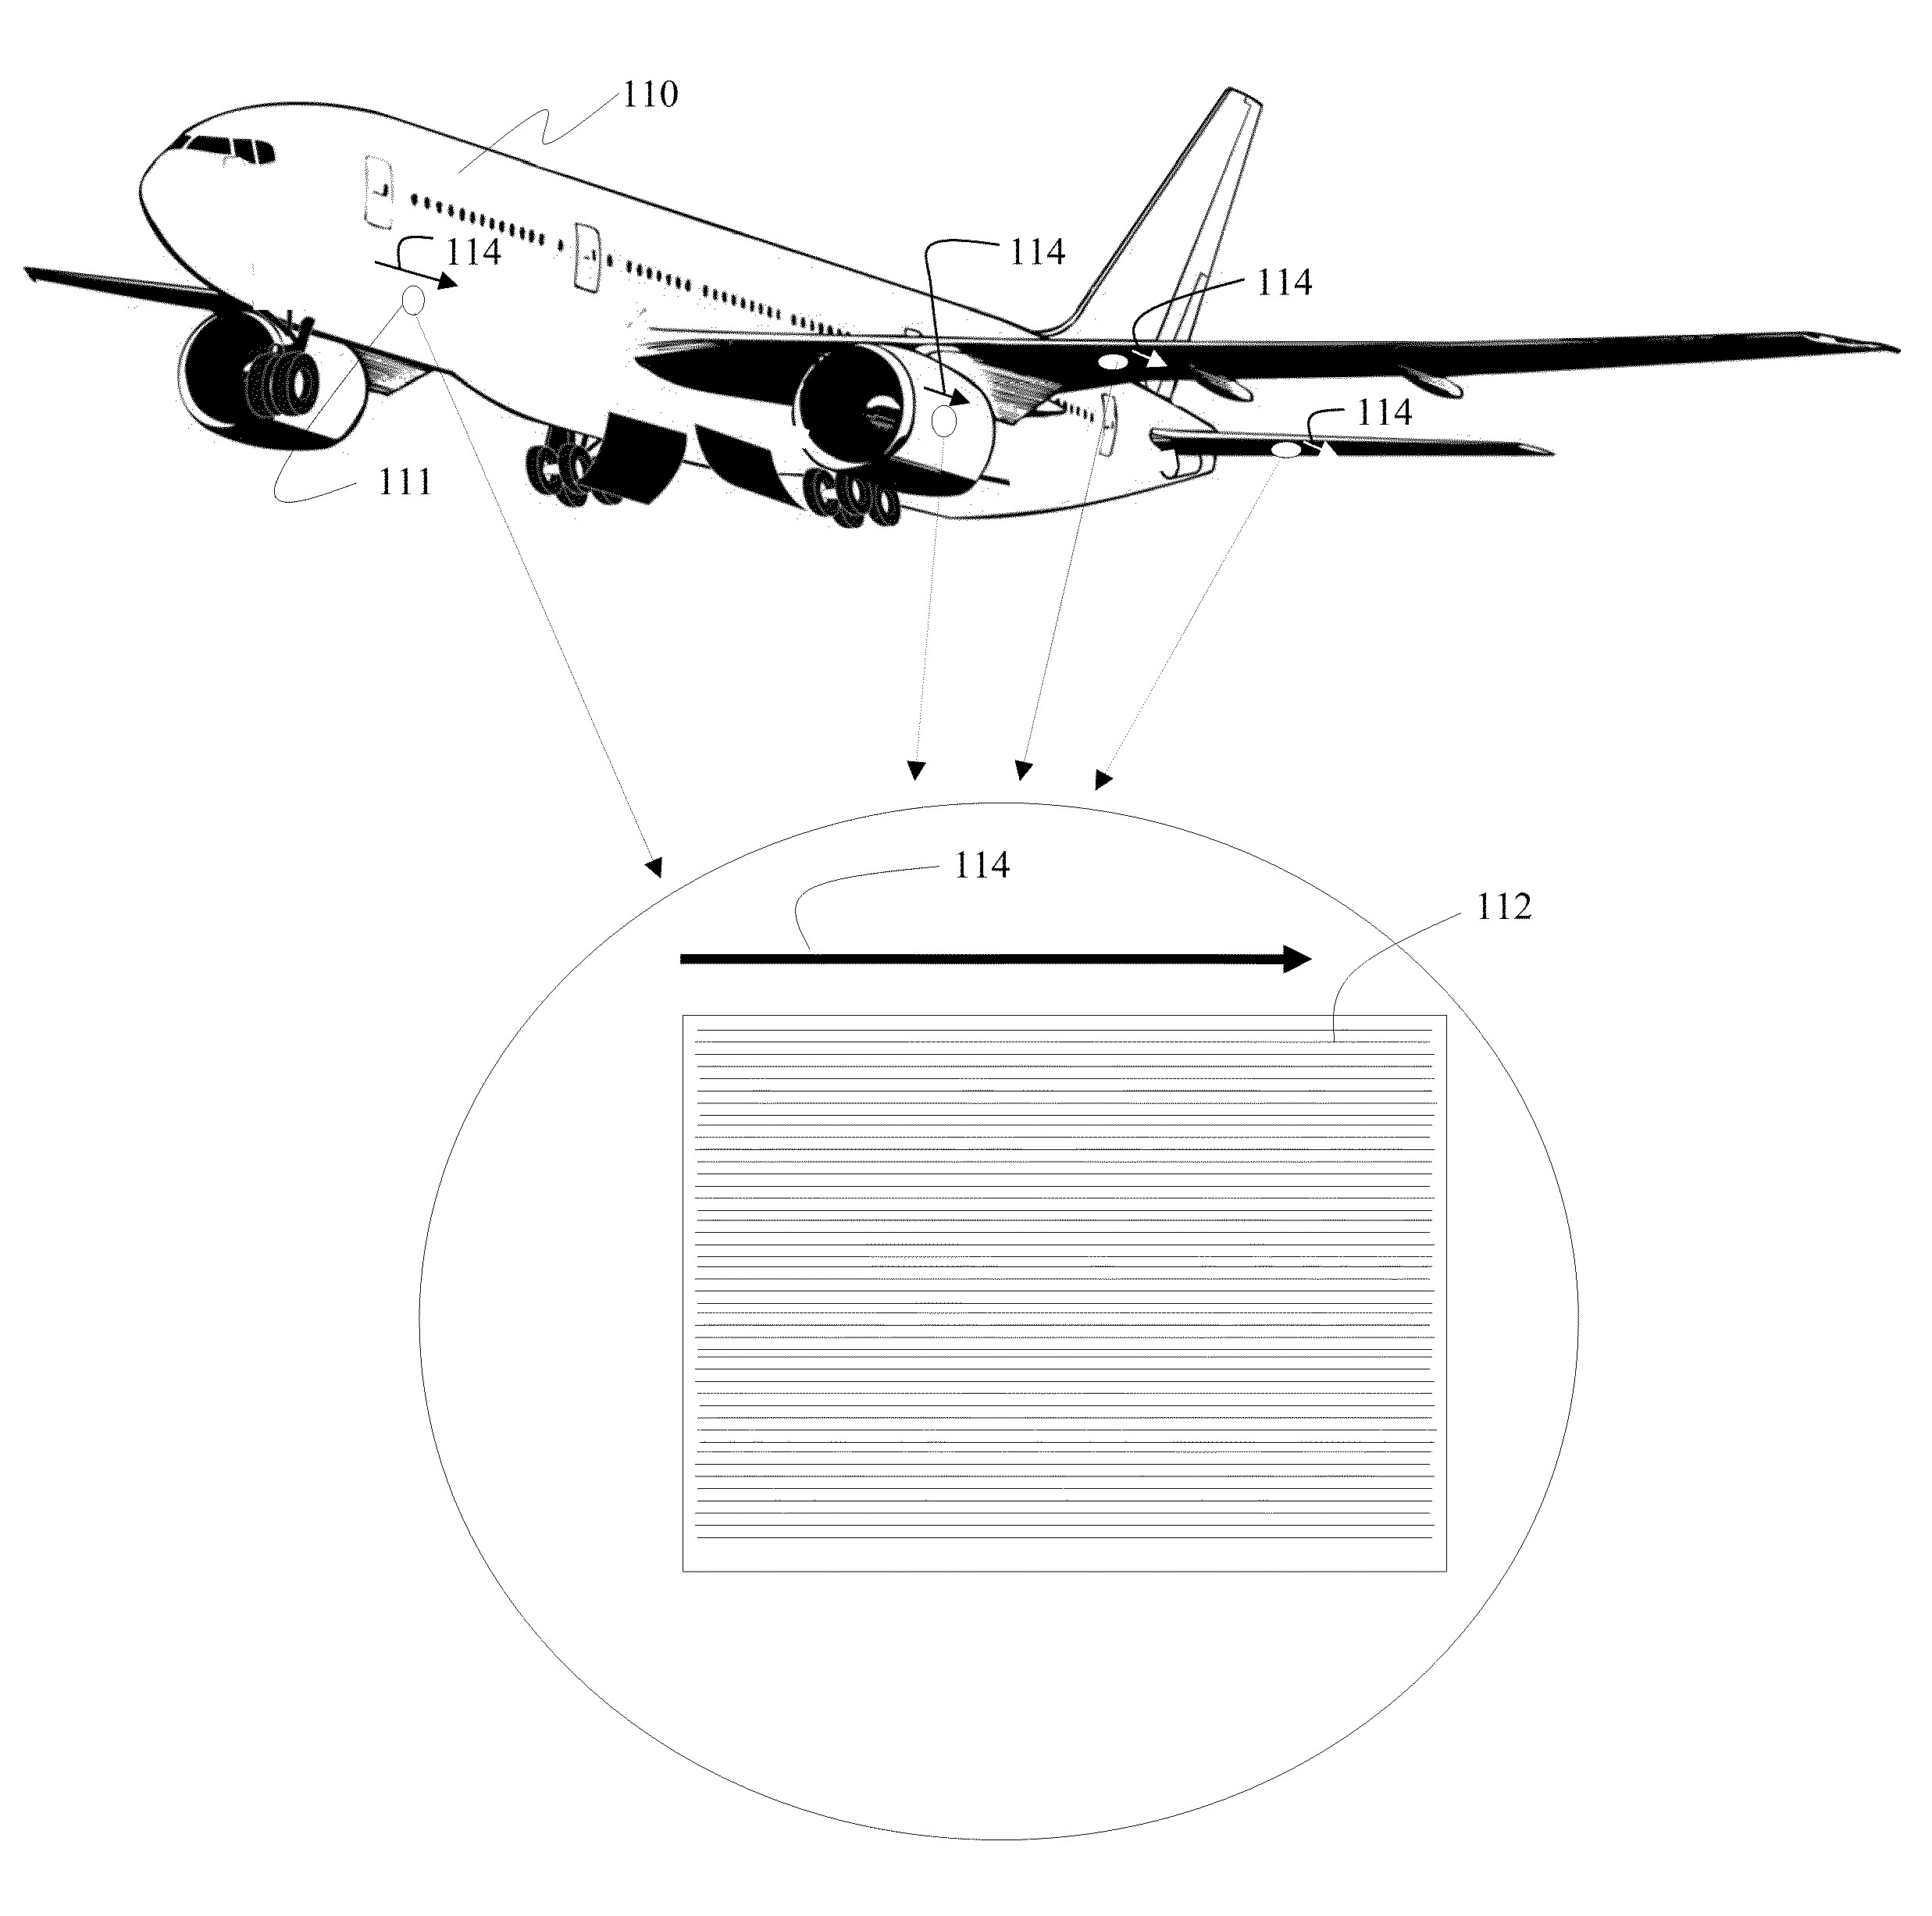 Structurally designed aerodynamic riblets